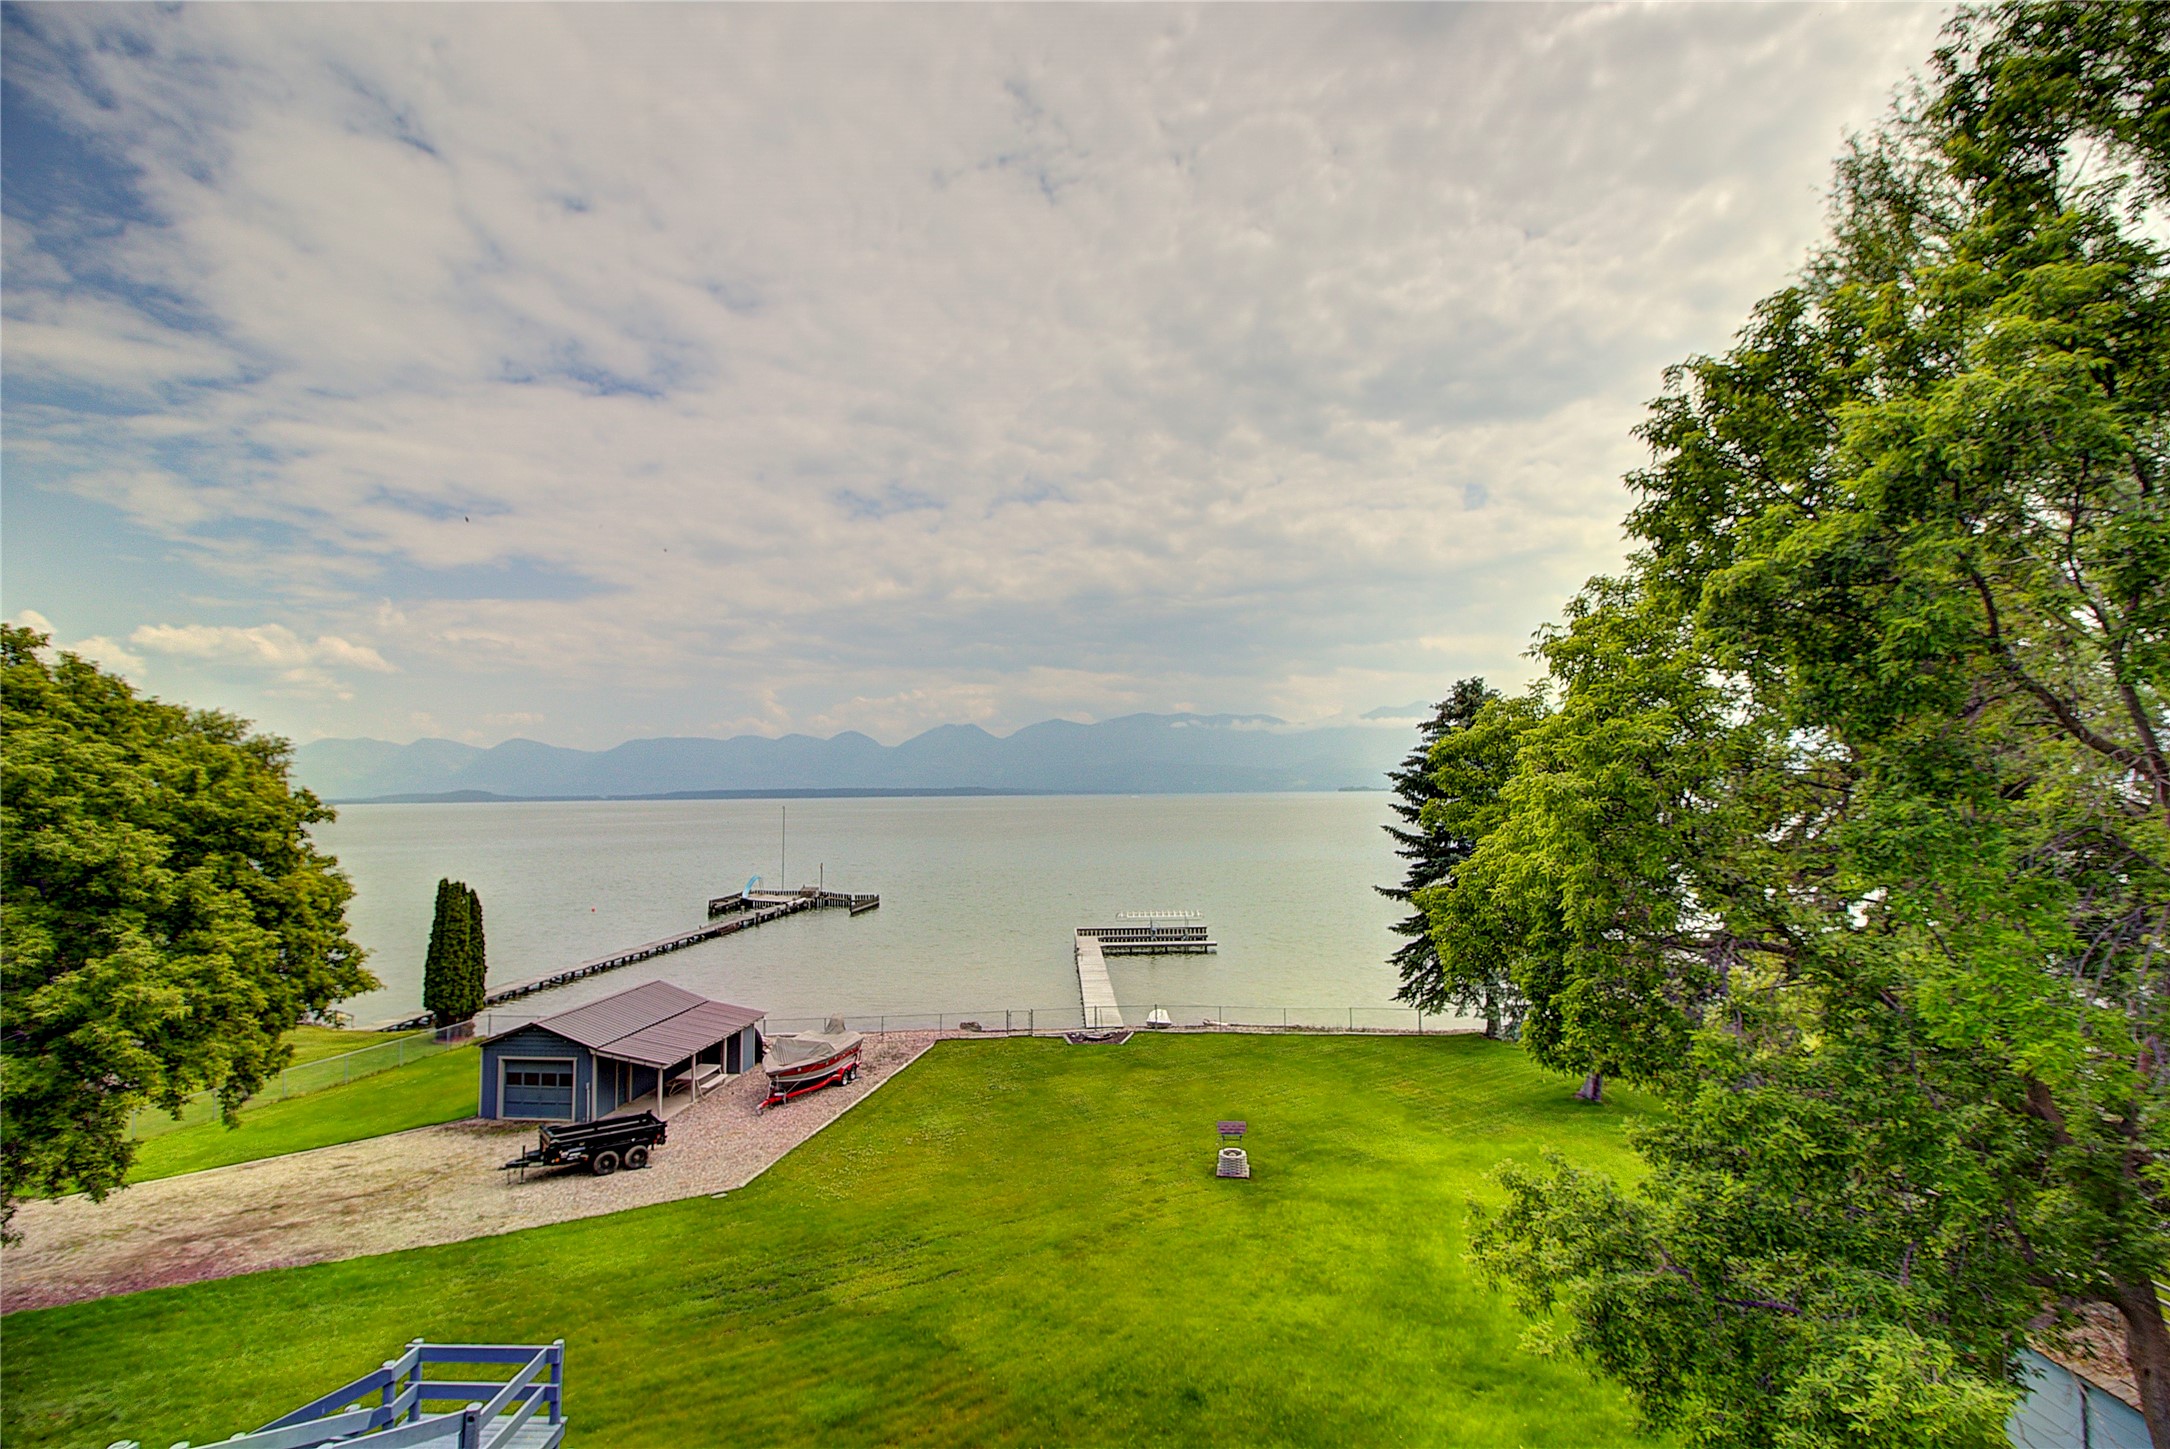 Looking for a special lake-front home with outstanding mountain views? This is it! 174' of Flathead Lake frontage, 1.70 acres, 3400 sq ft of home, 3 bedrooms, 3 baths, boat house, dock with covered boat lift, this home has it all! With a level, fenced back yard you will be having volley ball games and lots of company! The majority of the furniture is included in the purchase price. Located 1 mile east on Rocky Point Road, you are within 10 minutes of downtown Polson or 45 minutes to Kalispell. 2 water rights included, one to the well and one to the lake. Please call Susan Raub-Fortner at (406)370-2076 or your real estate professional for a private showing.